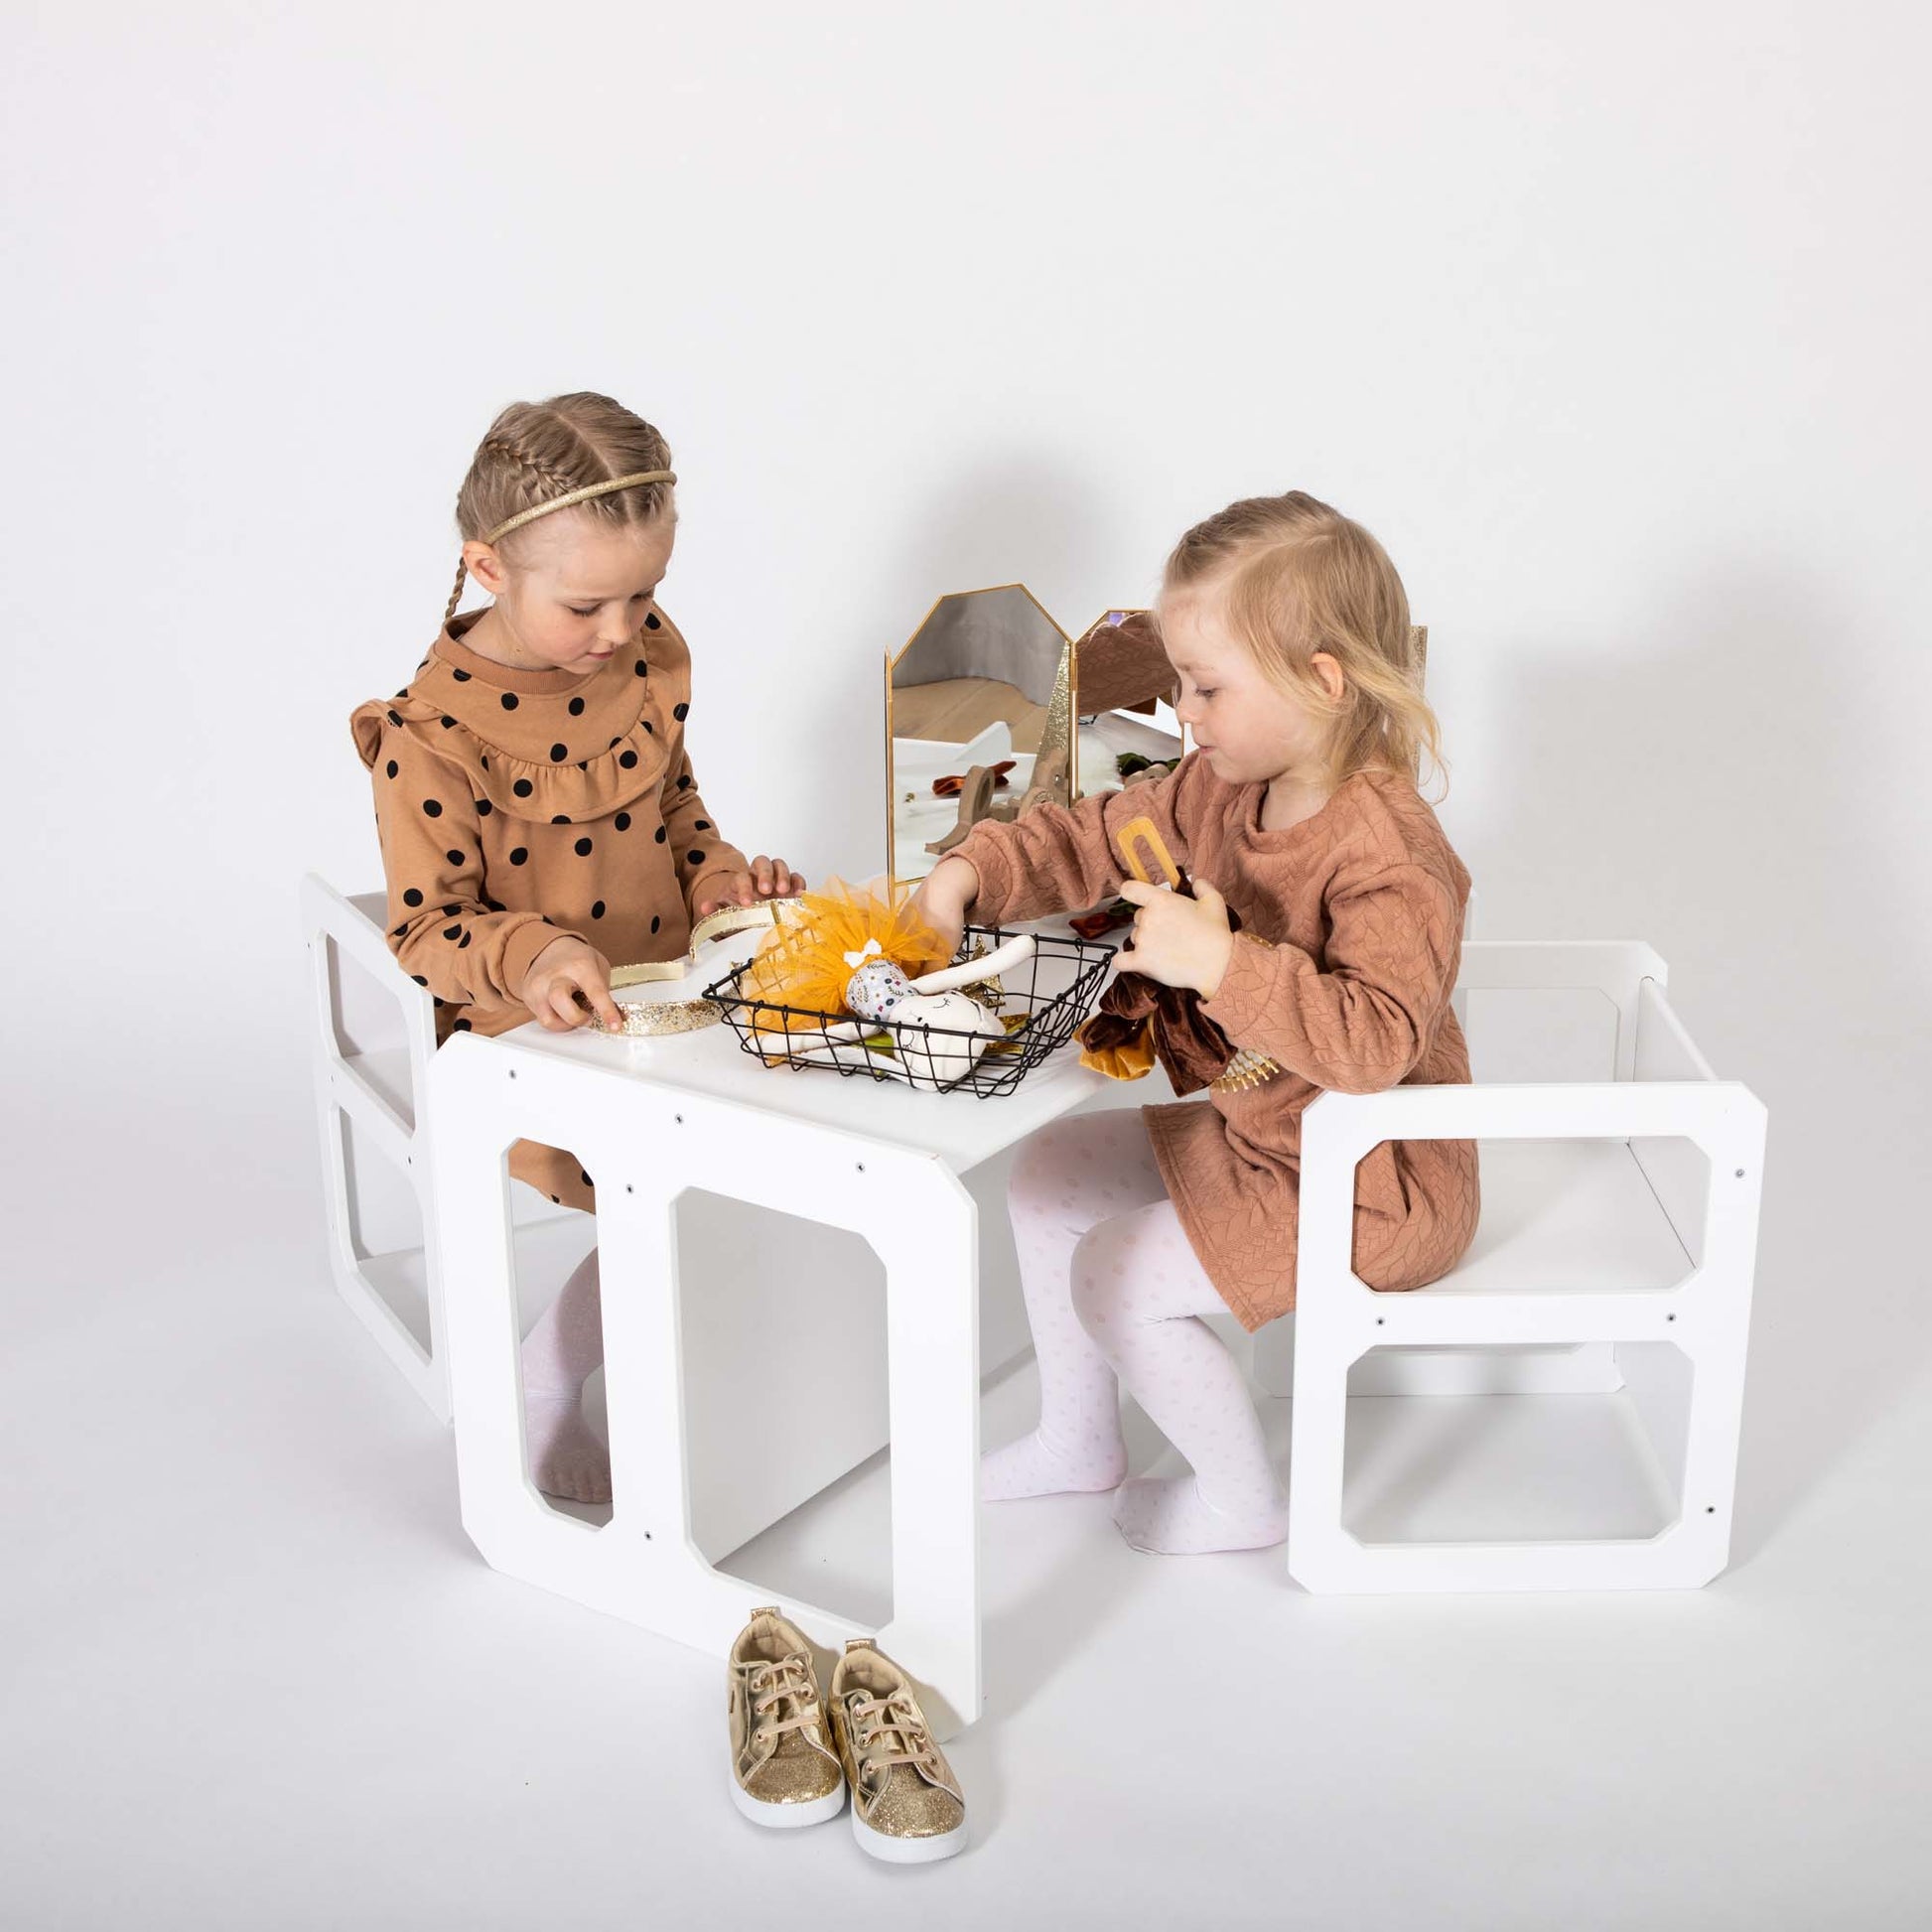 Two young children are sitting in a Montessori weaning table and 2 chair set, playing with stuffed animals and toys on the white surface, fostering independence and encouraging fine motor skill development.